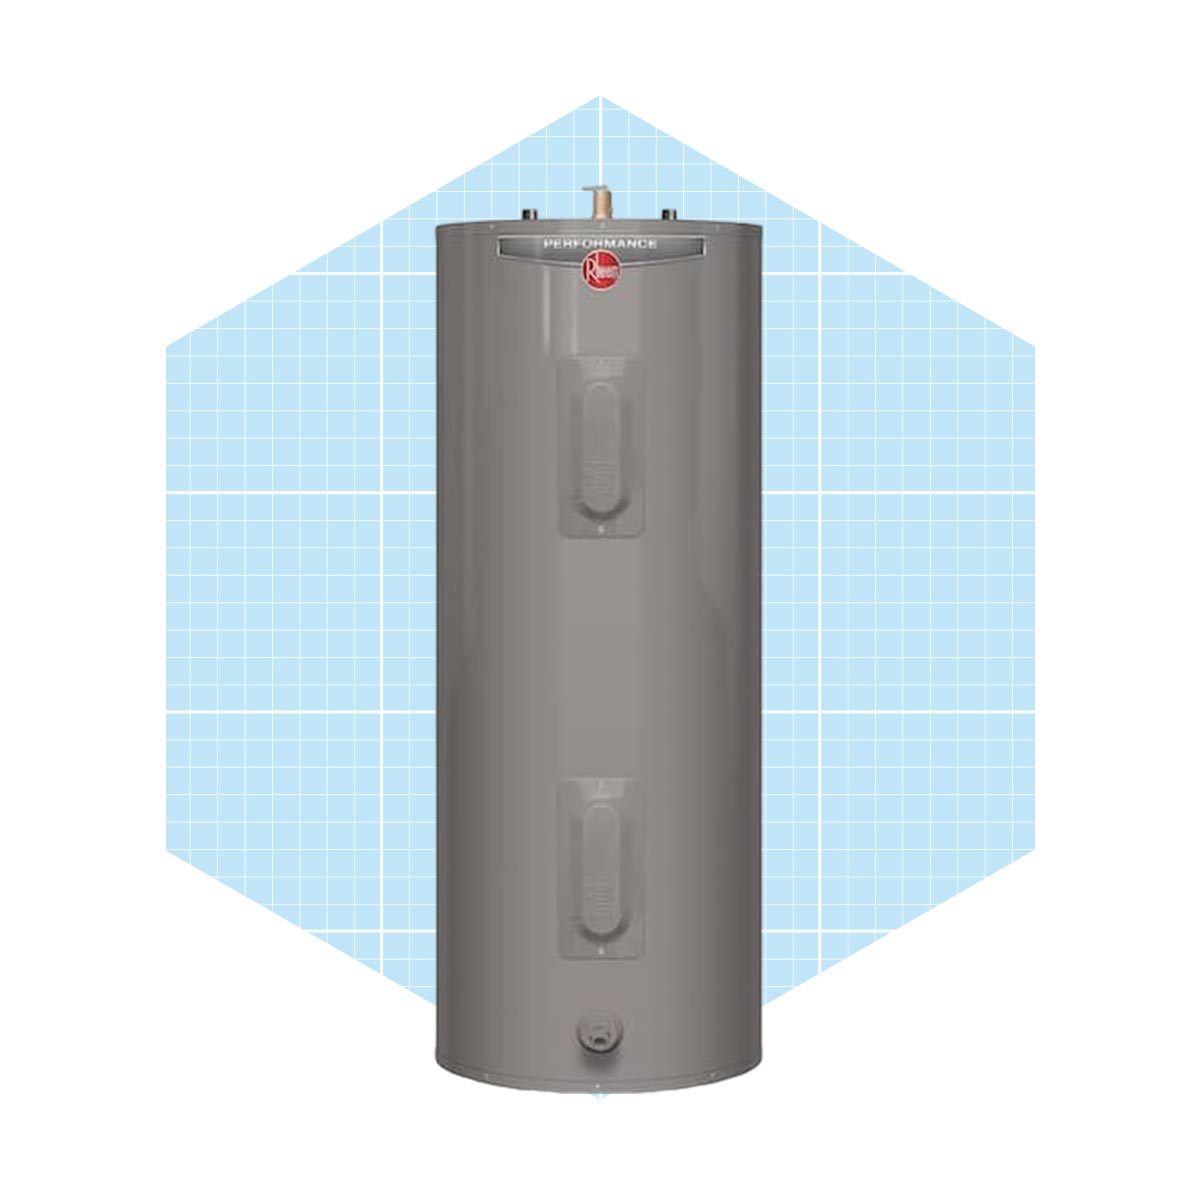 Is Water Heater Insulation Really That Important? - Vern Kummers